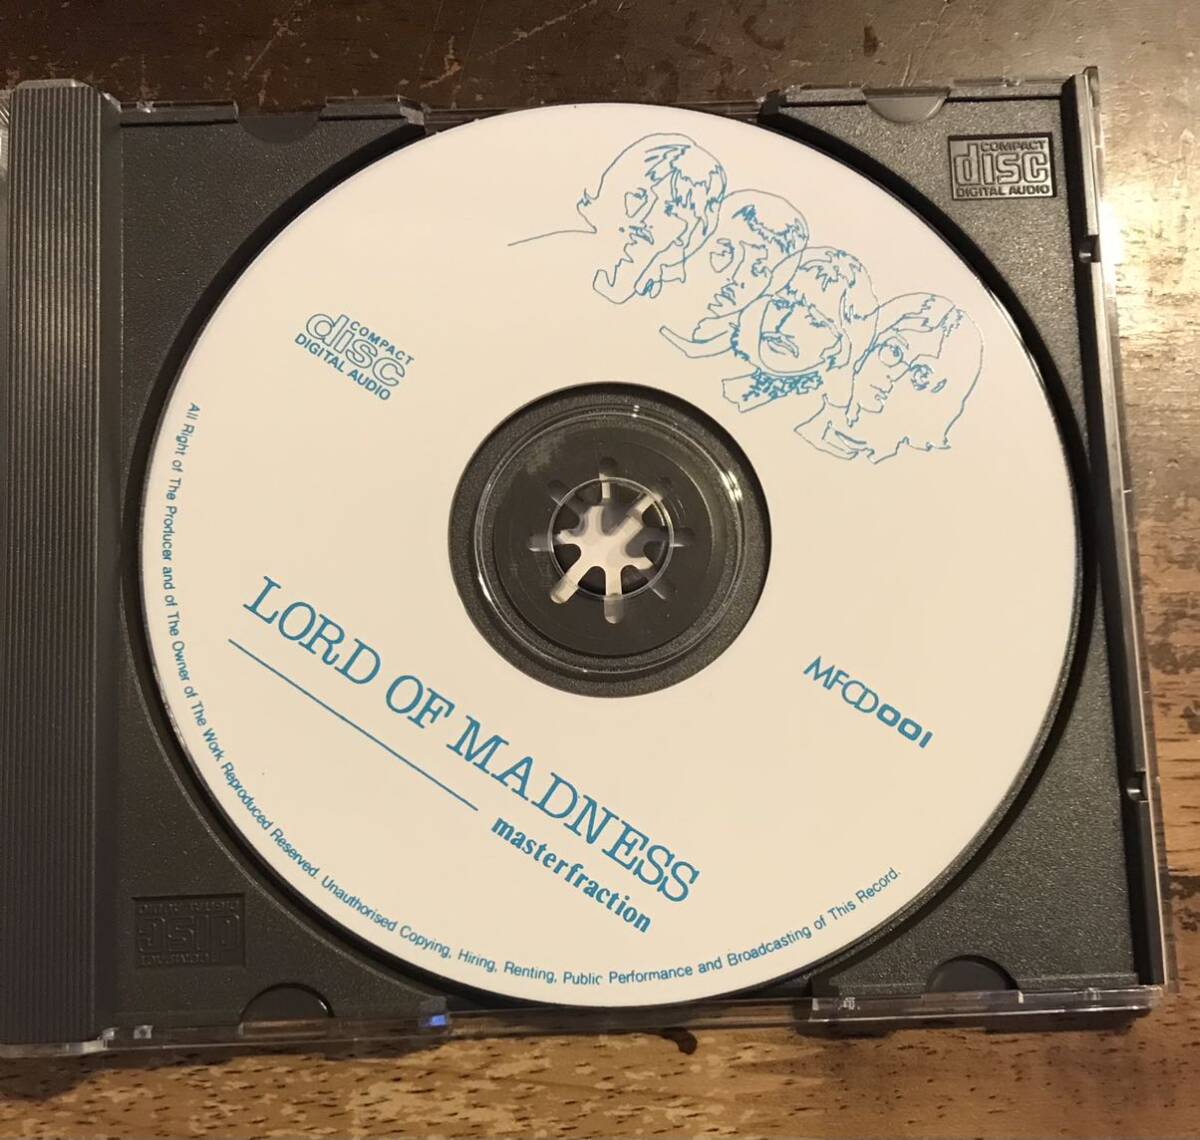 The Beatles / Lord Of Madness: The Definitive The Beatles Album Sessions Collection / 1CD / “The Beatles (White Album)” Outtake_画像5